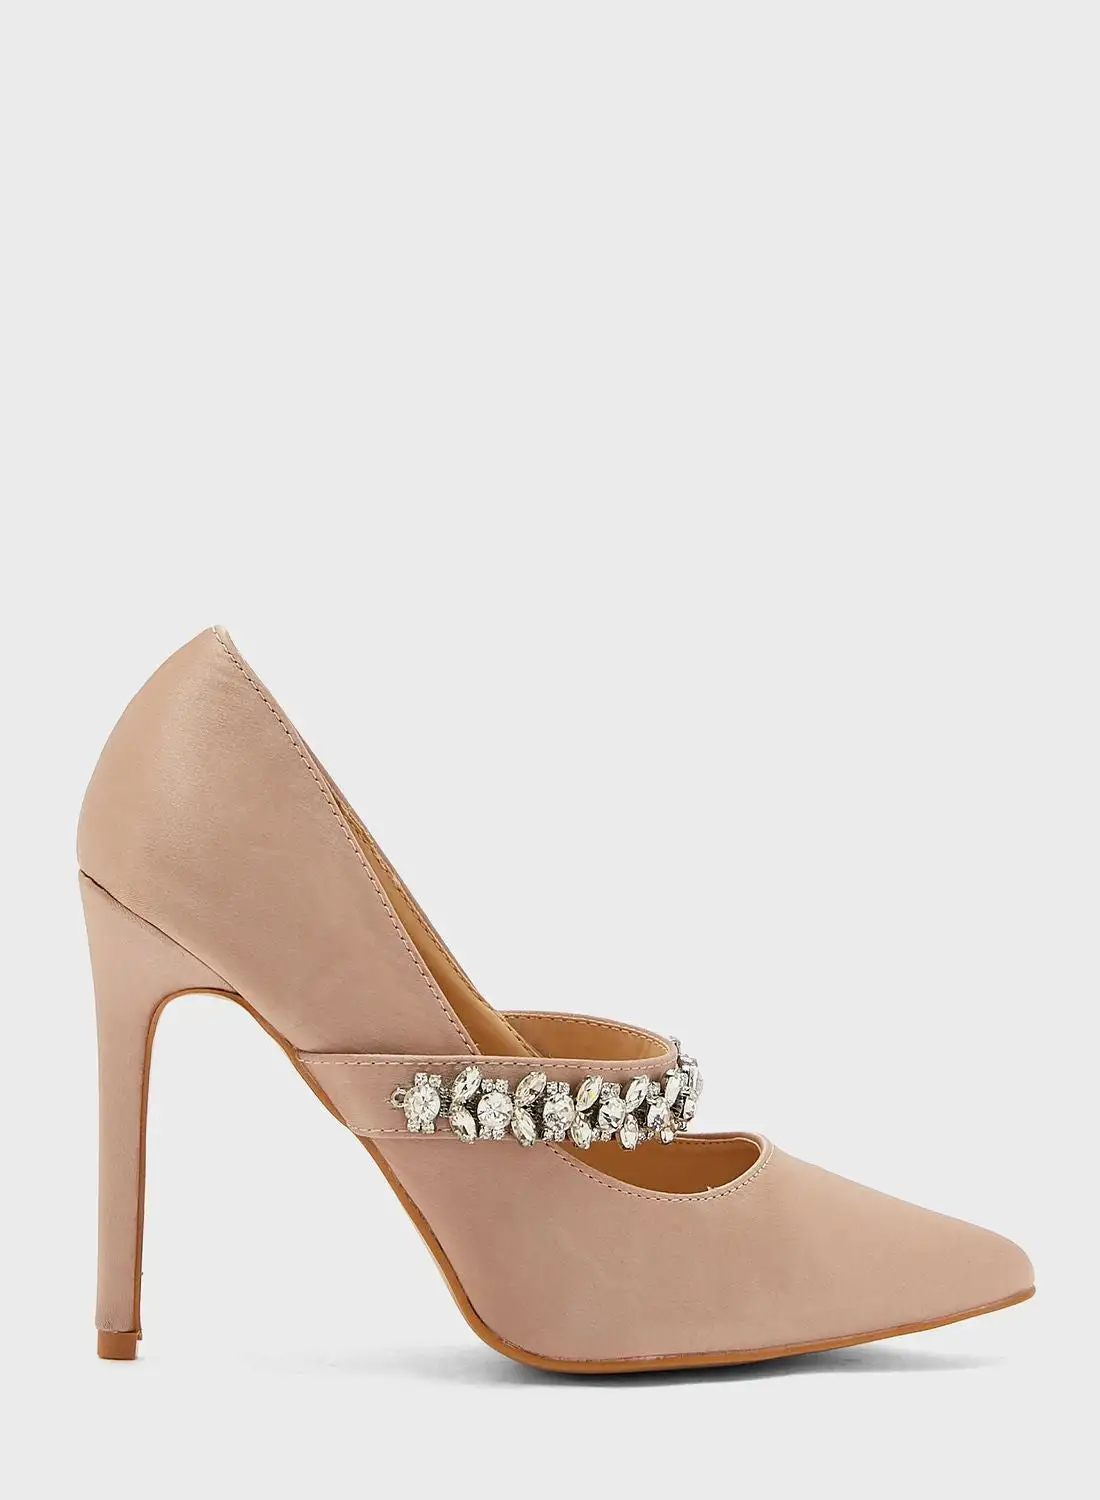 Ella Limited Edition Pointed Satin Stiletto With Embellished Strap